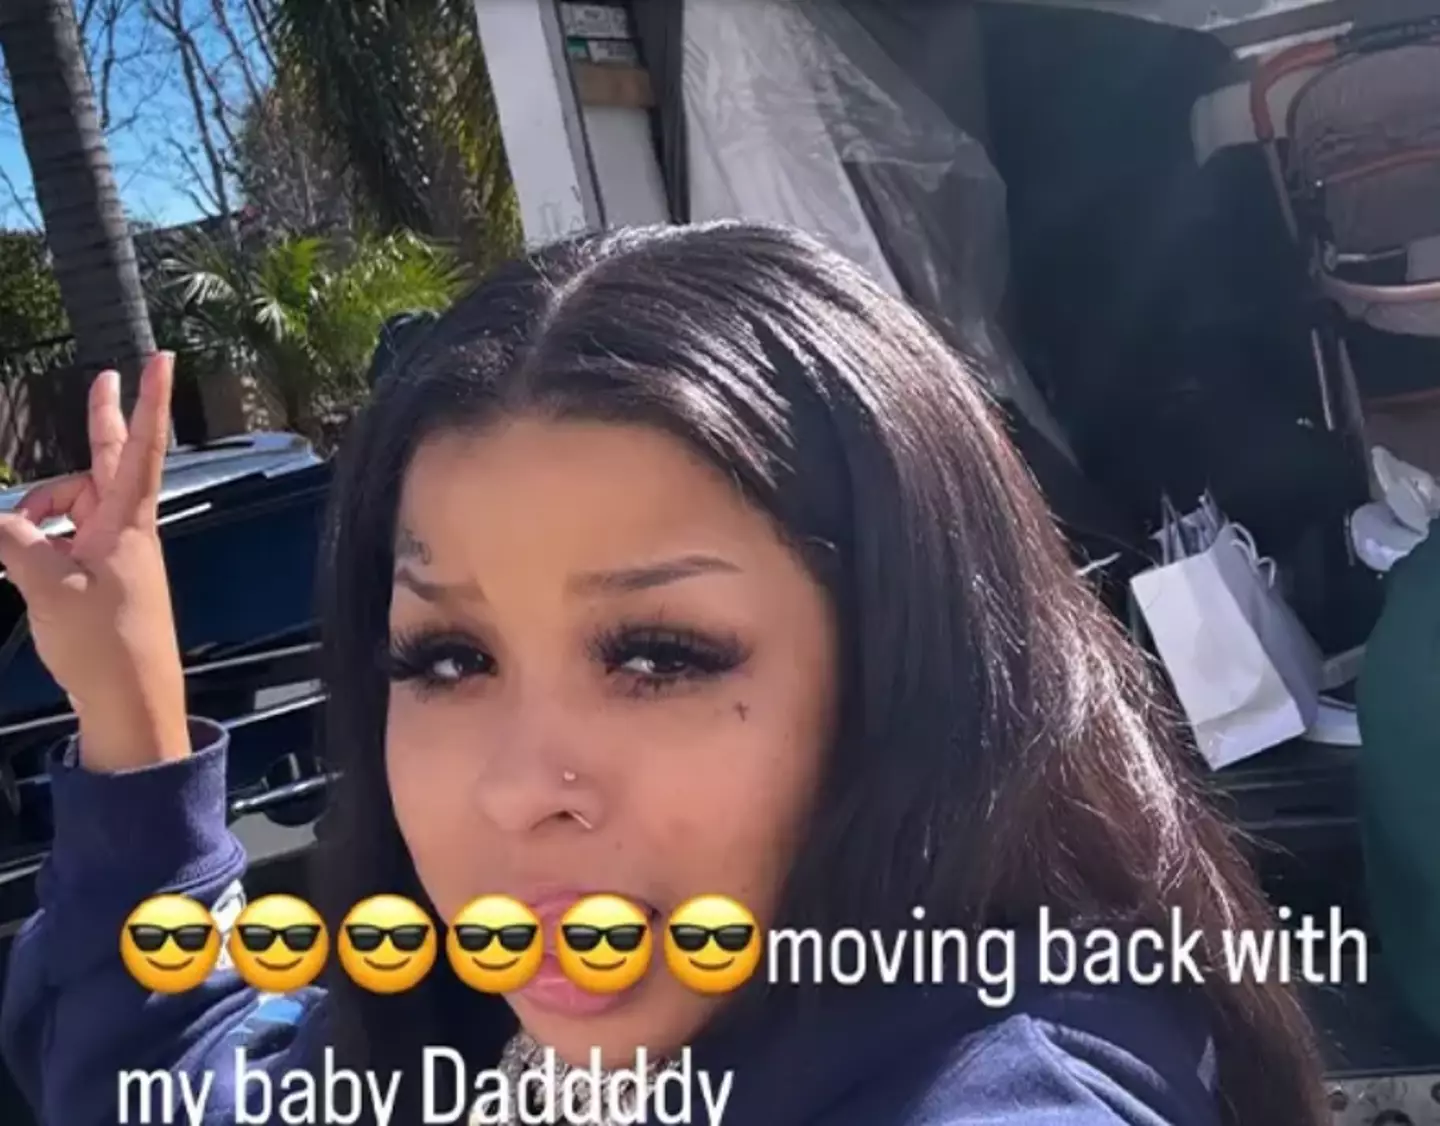 Chrisean Rock shocked followers by moving into Blueface's home.